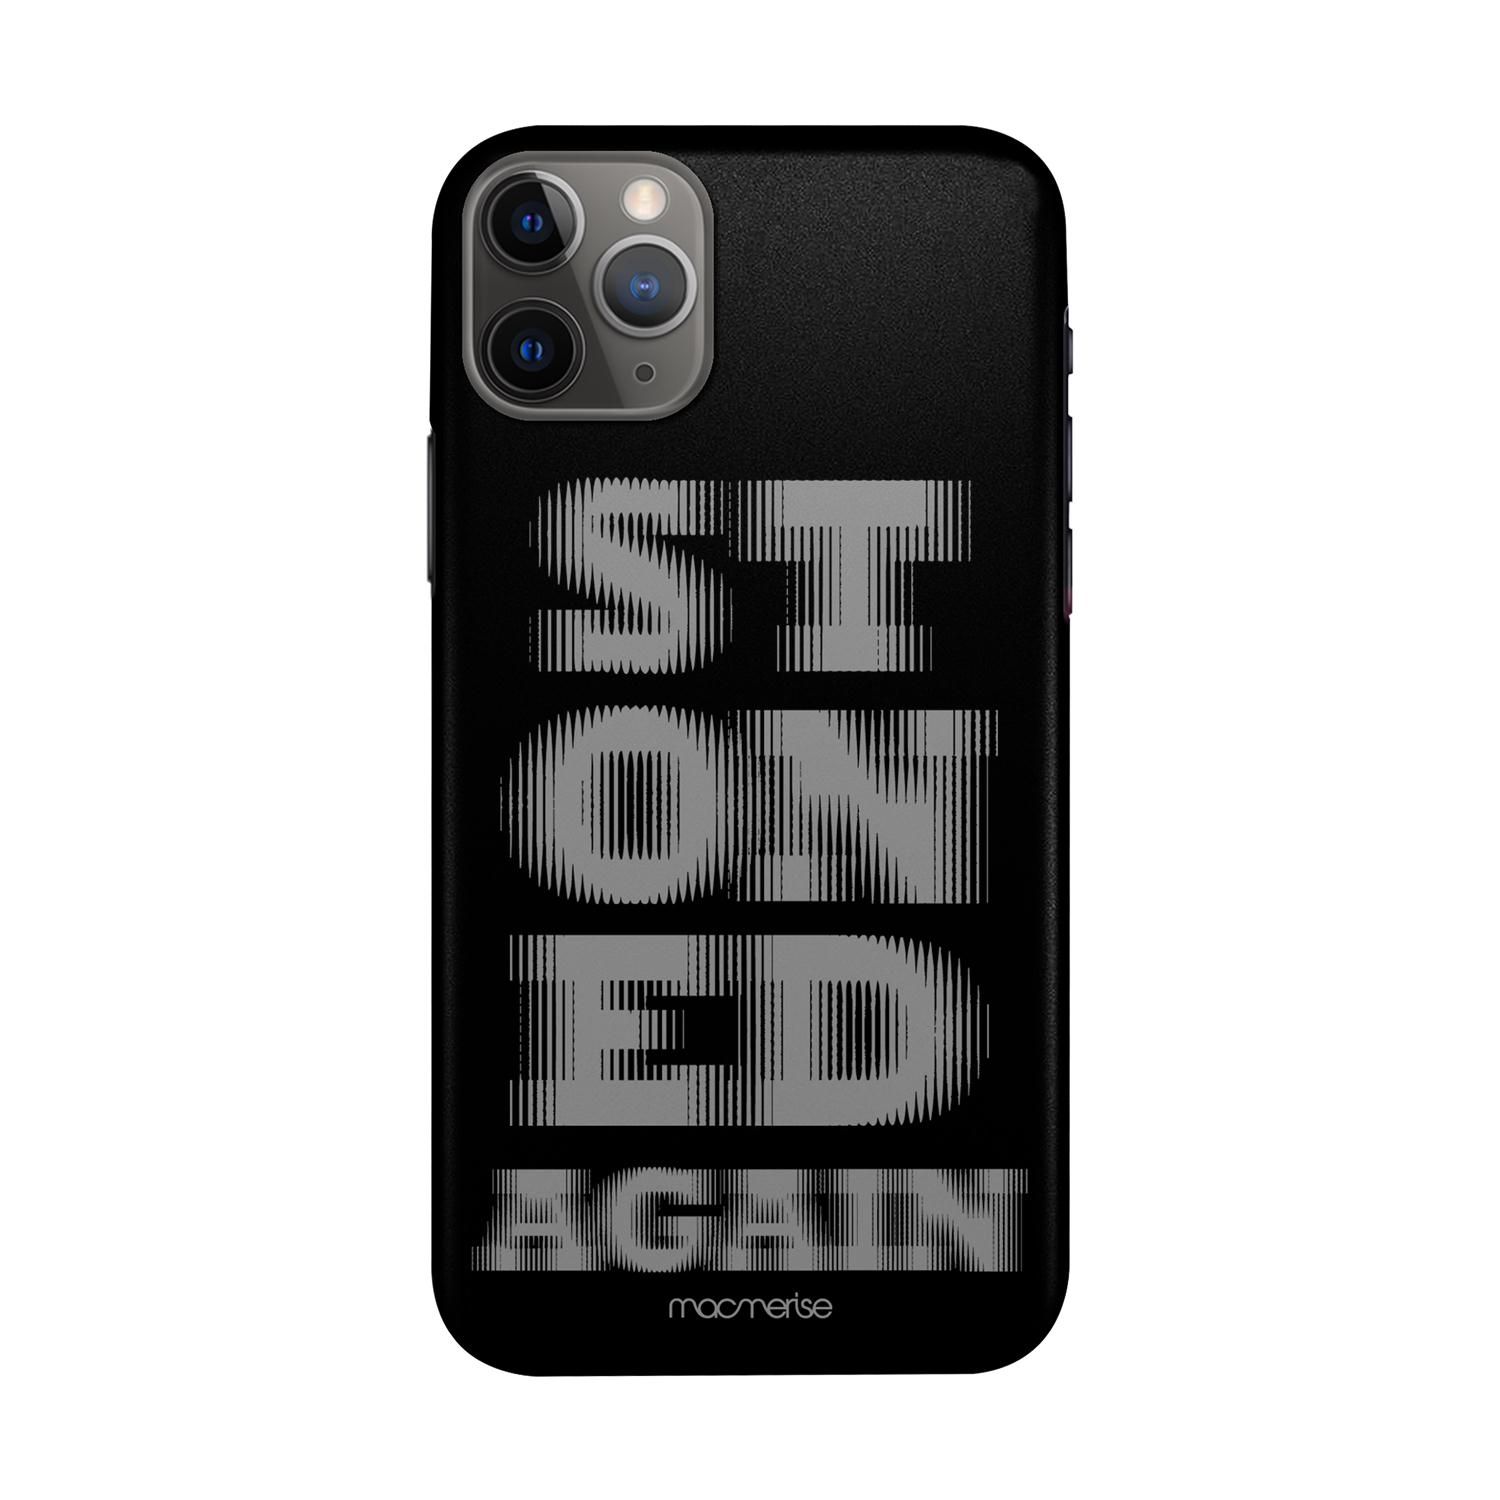 Buy Stoned Again - Sleek Phone Case for iPhone 11 Pro Max Online